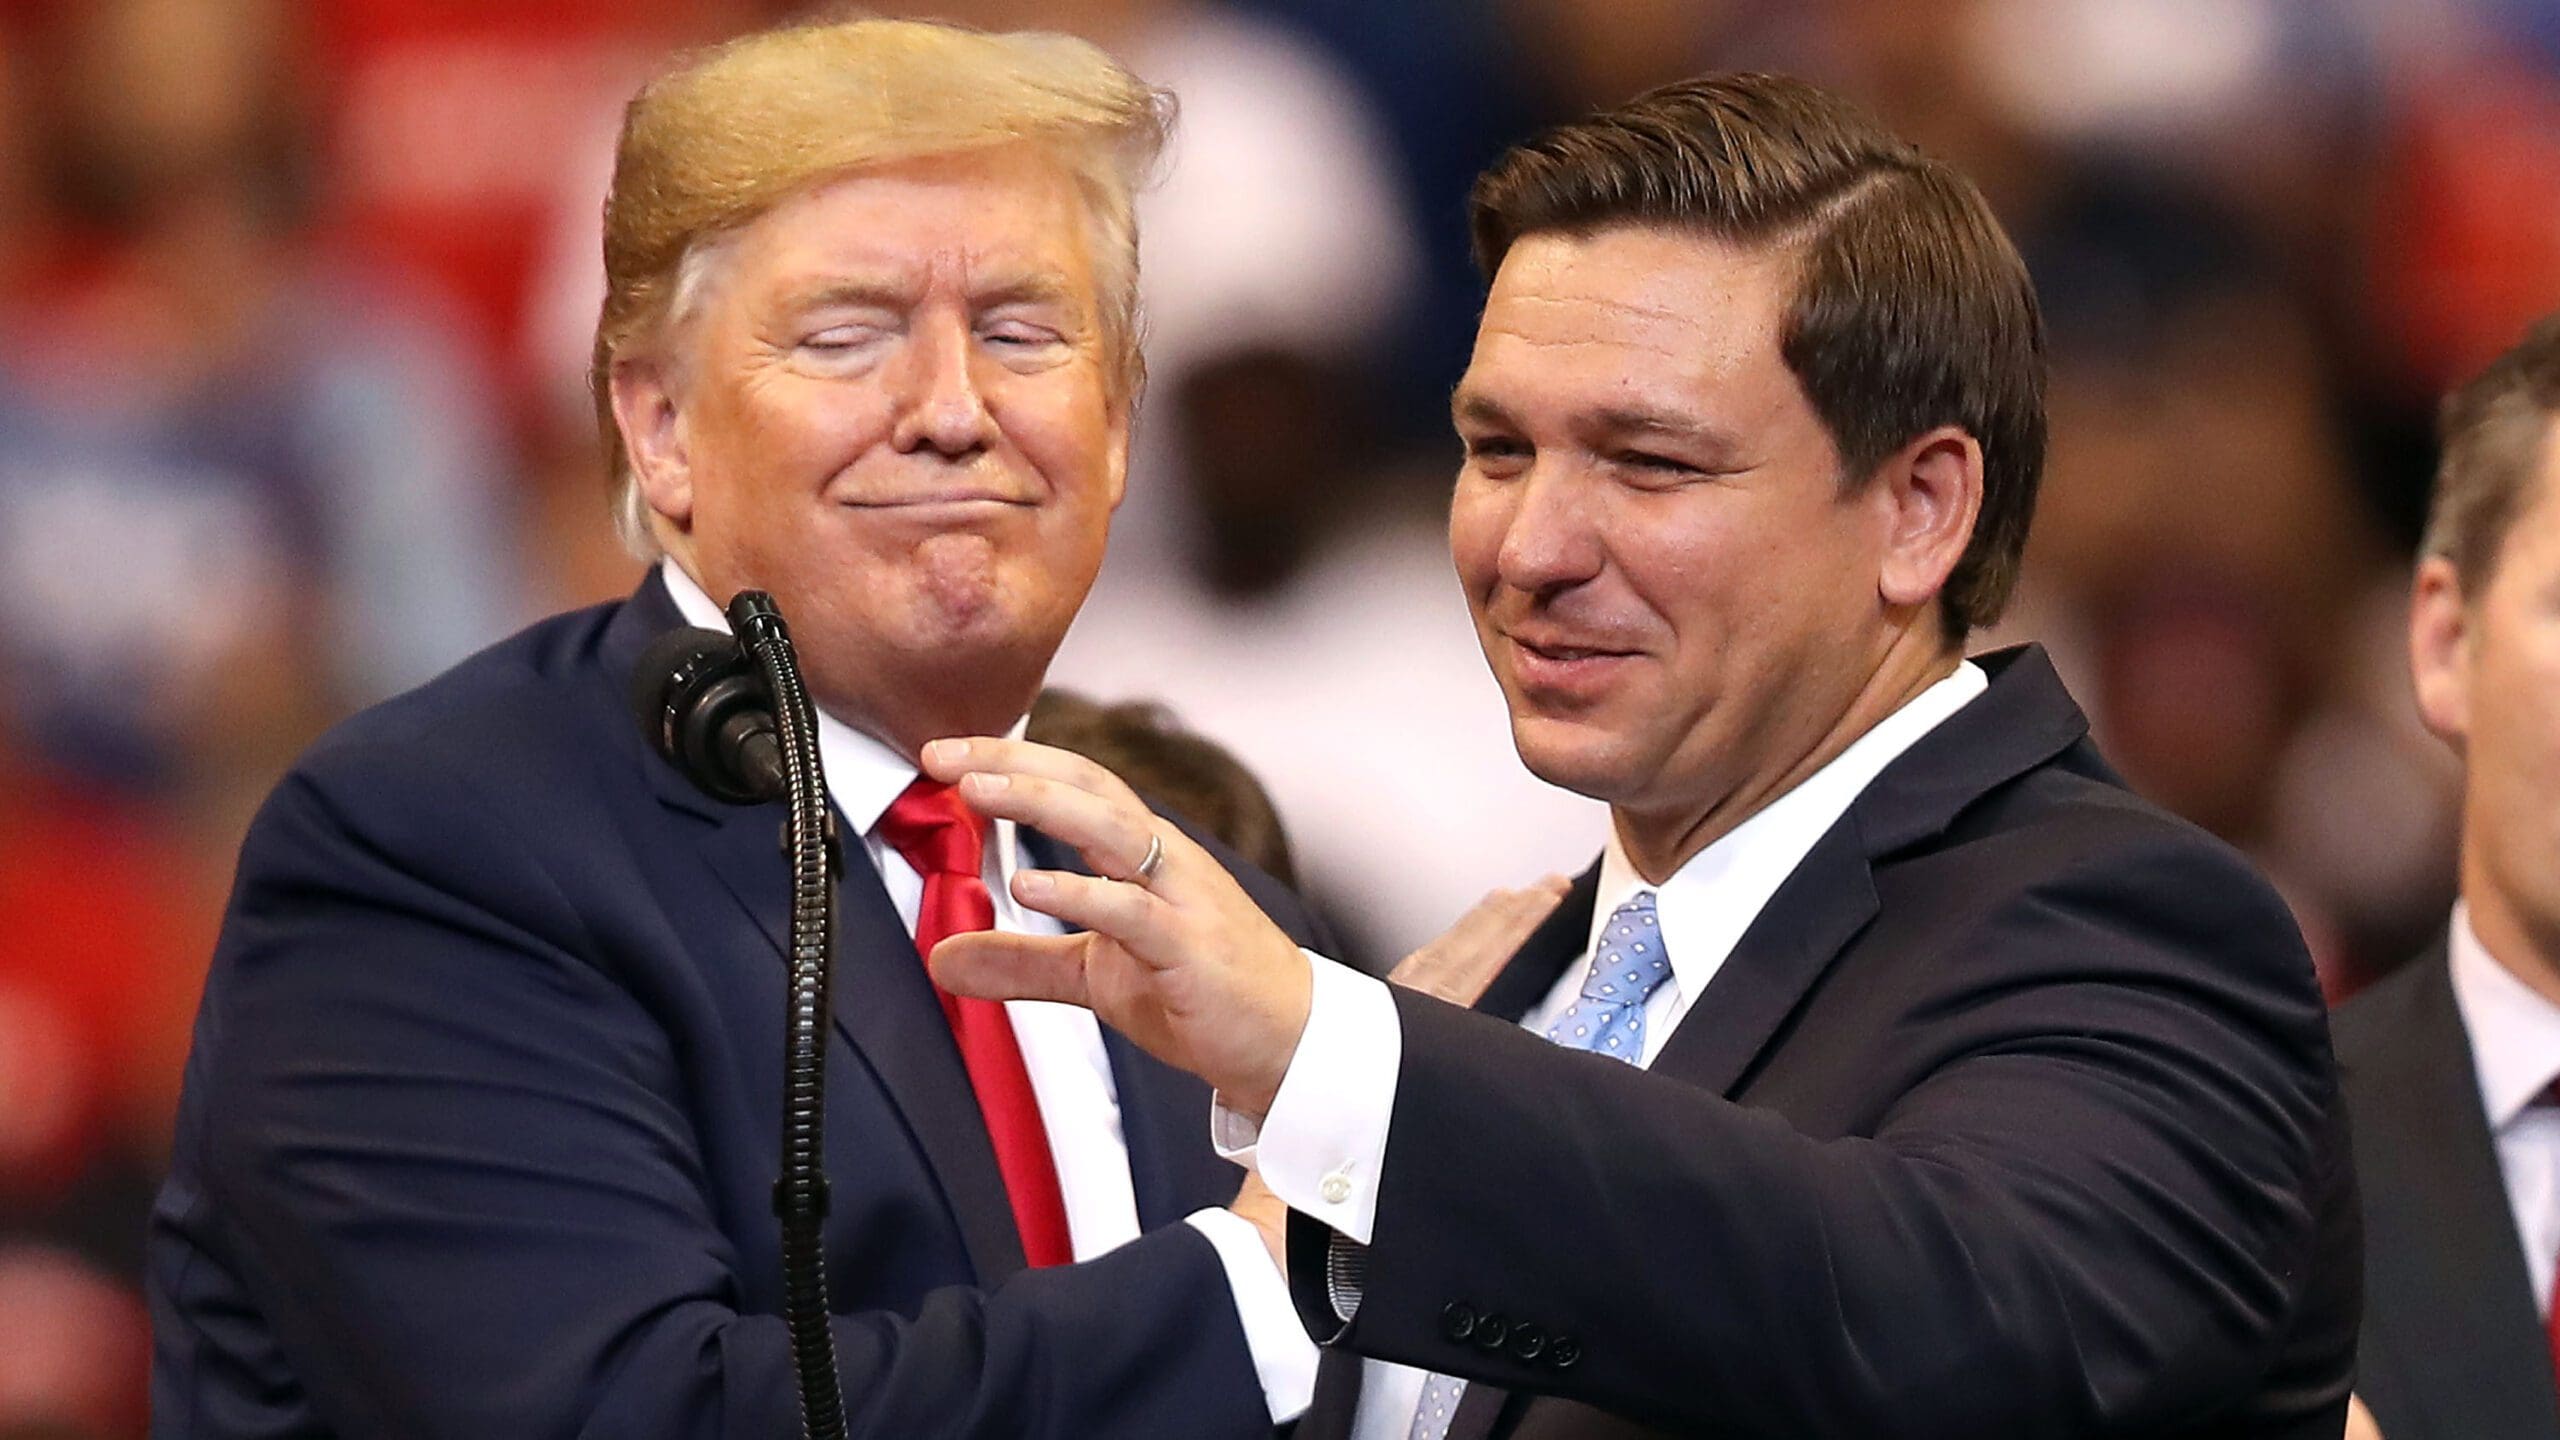 new-2024-florida-republican-presidential-primary-poll-between-trump-and-desantis-shows-a-total-blowout